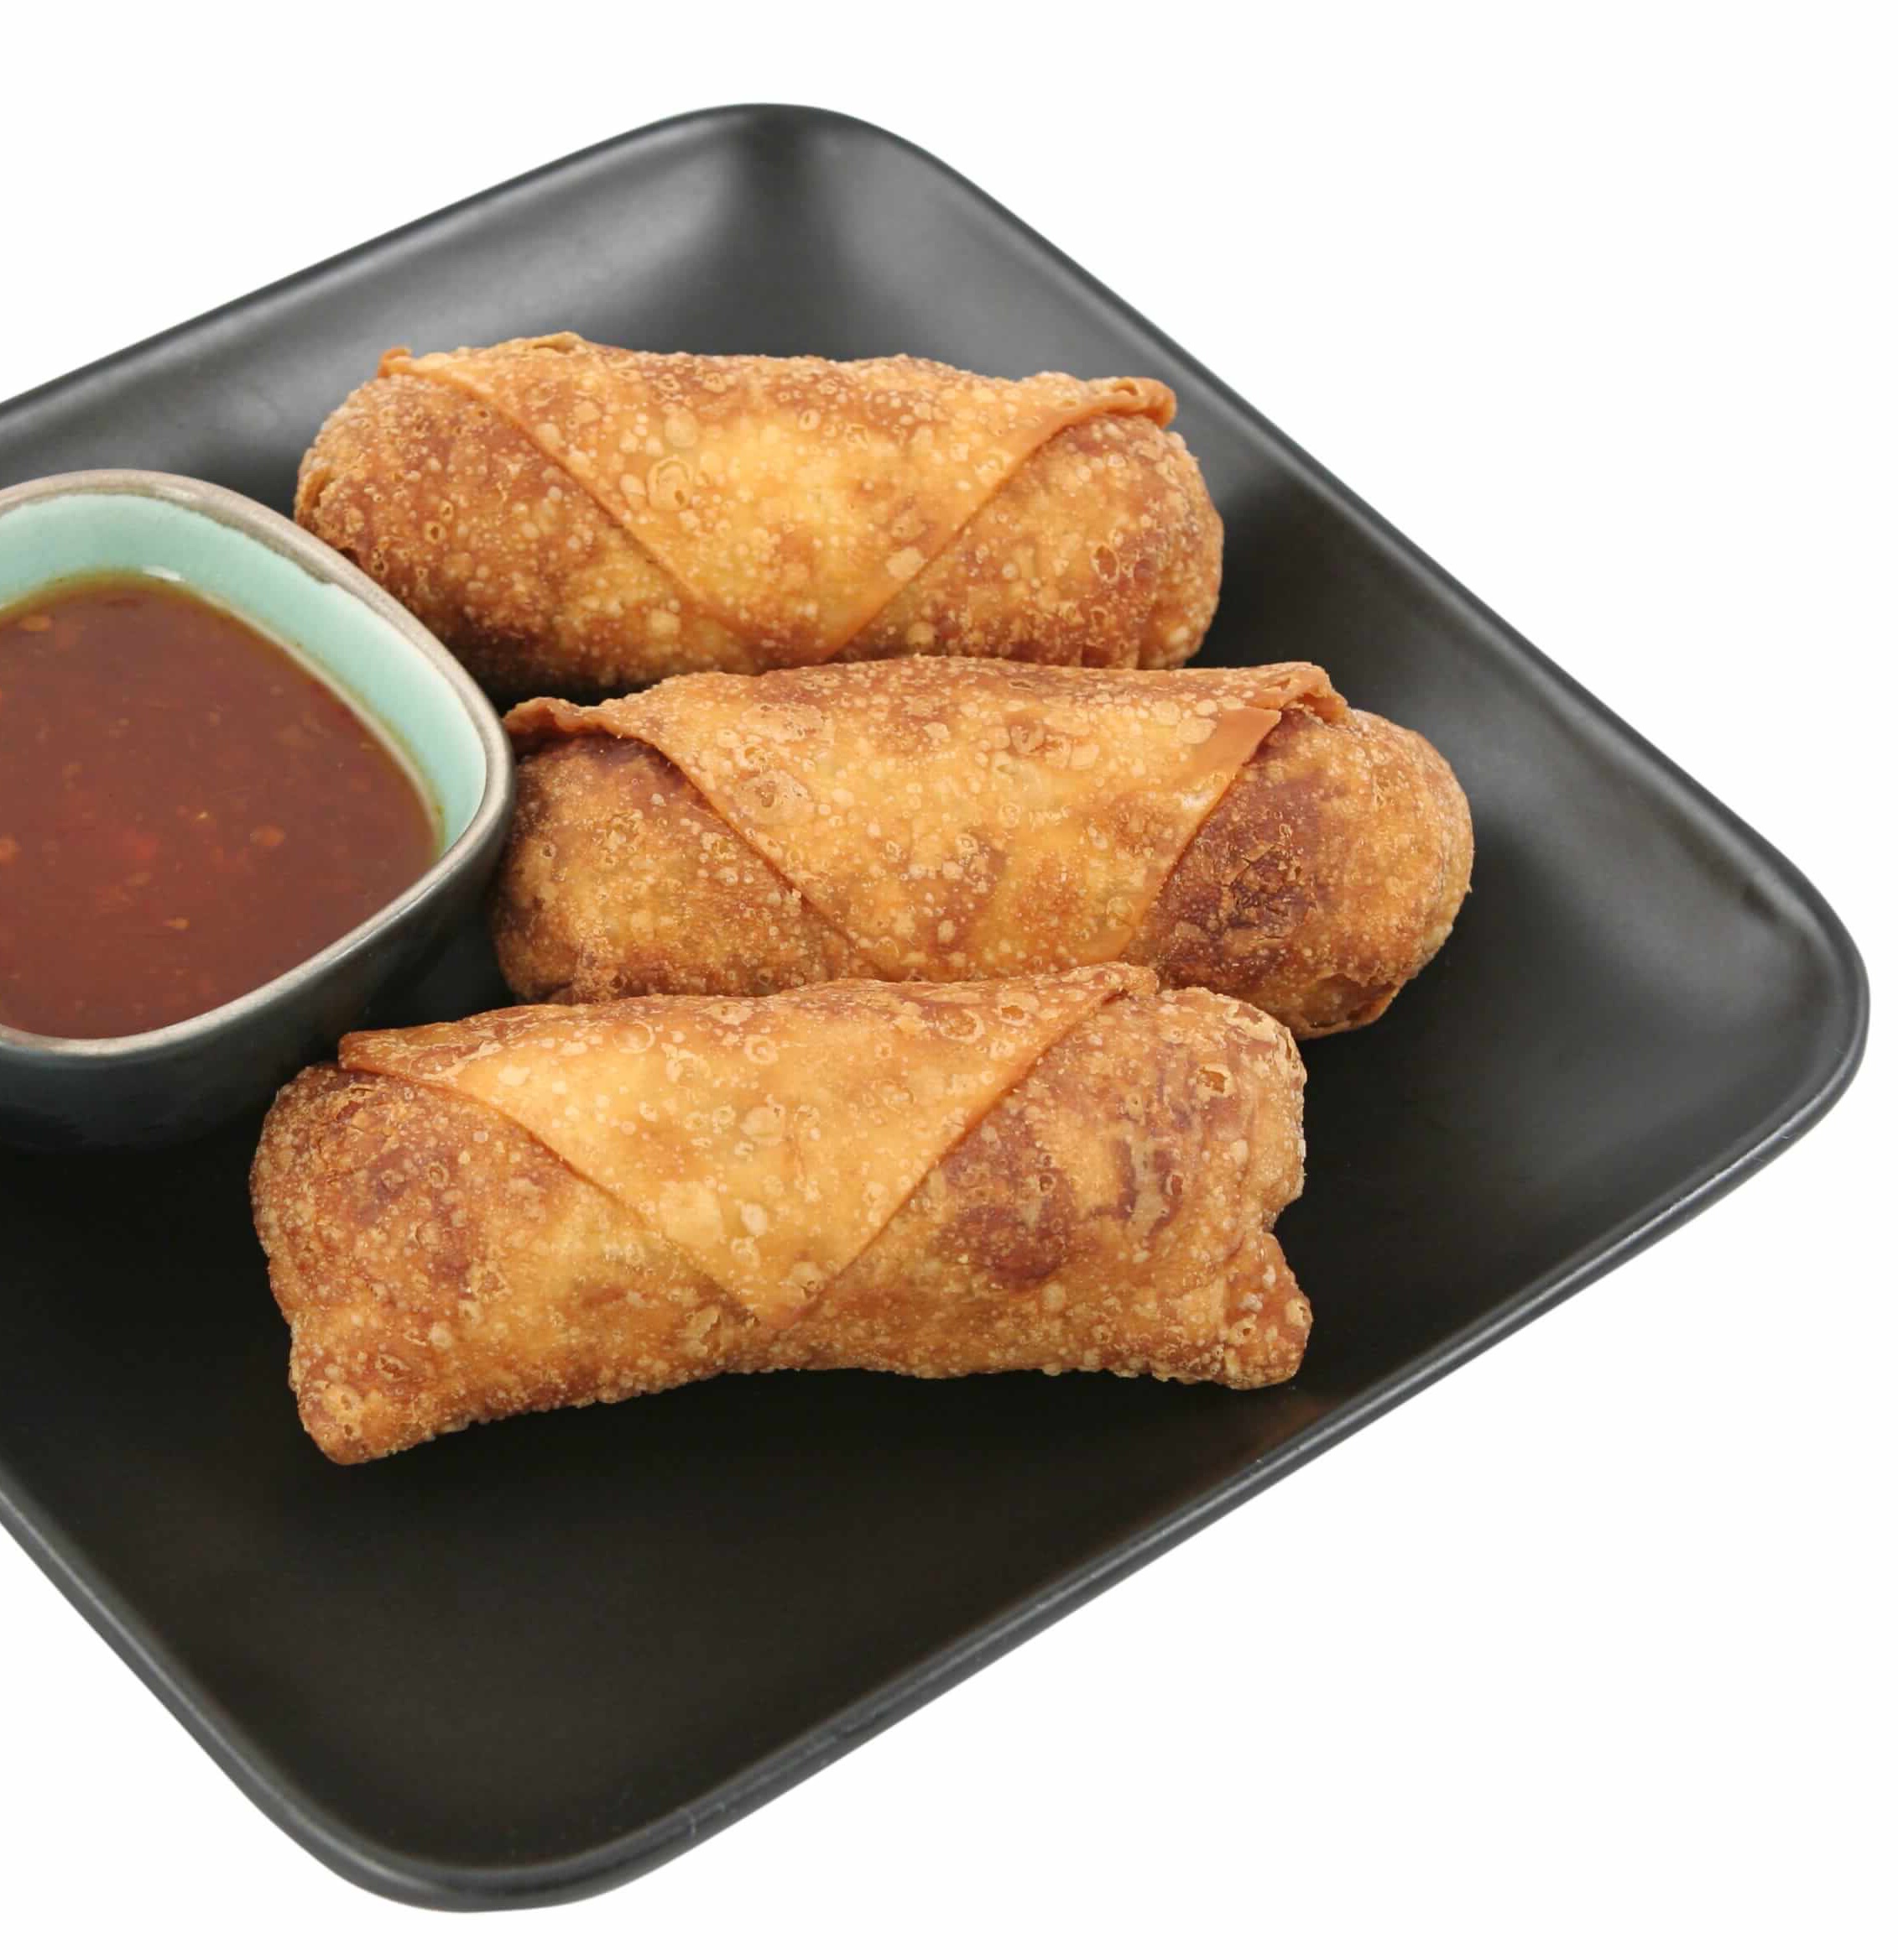 Sushi Bistro Egg Rolls with chili sauce